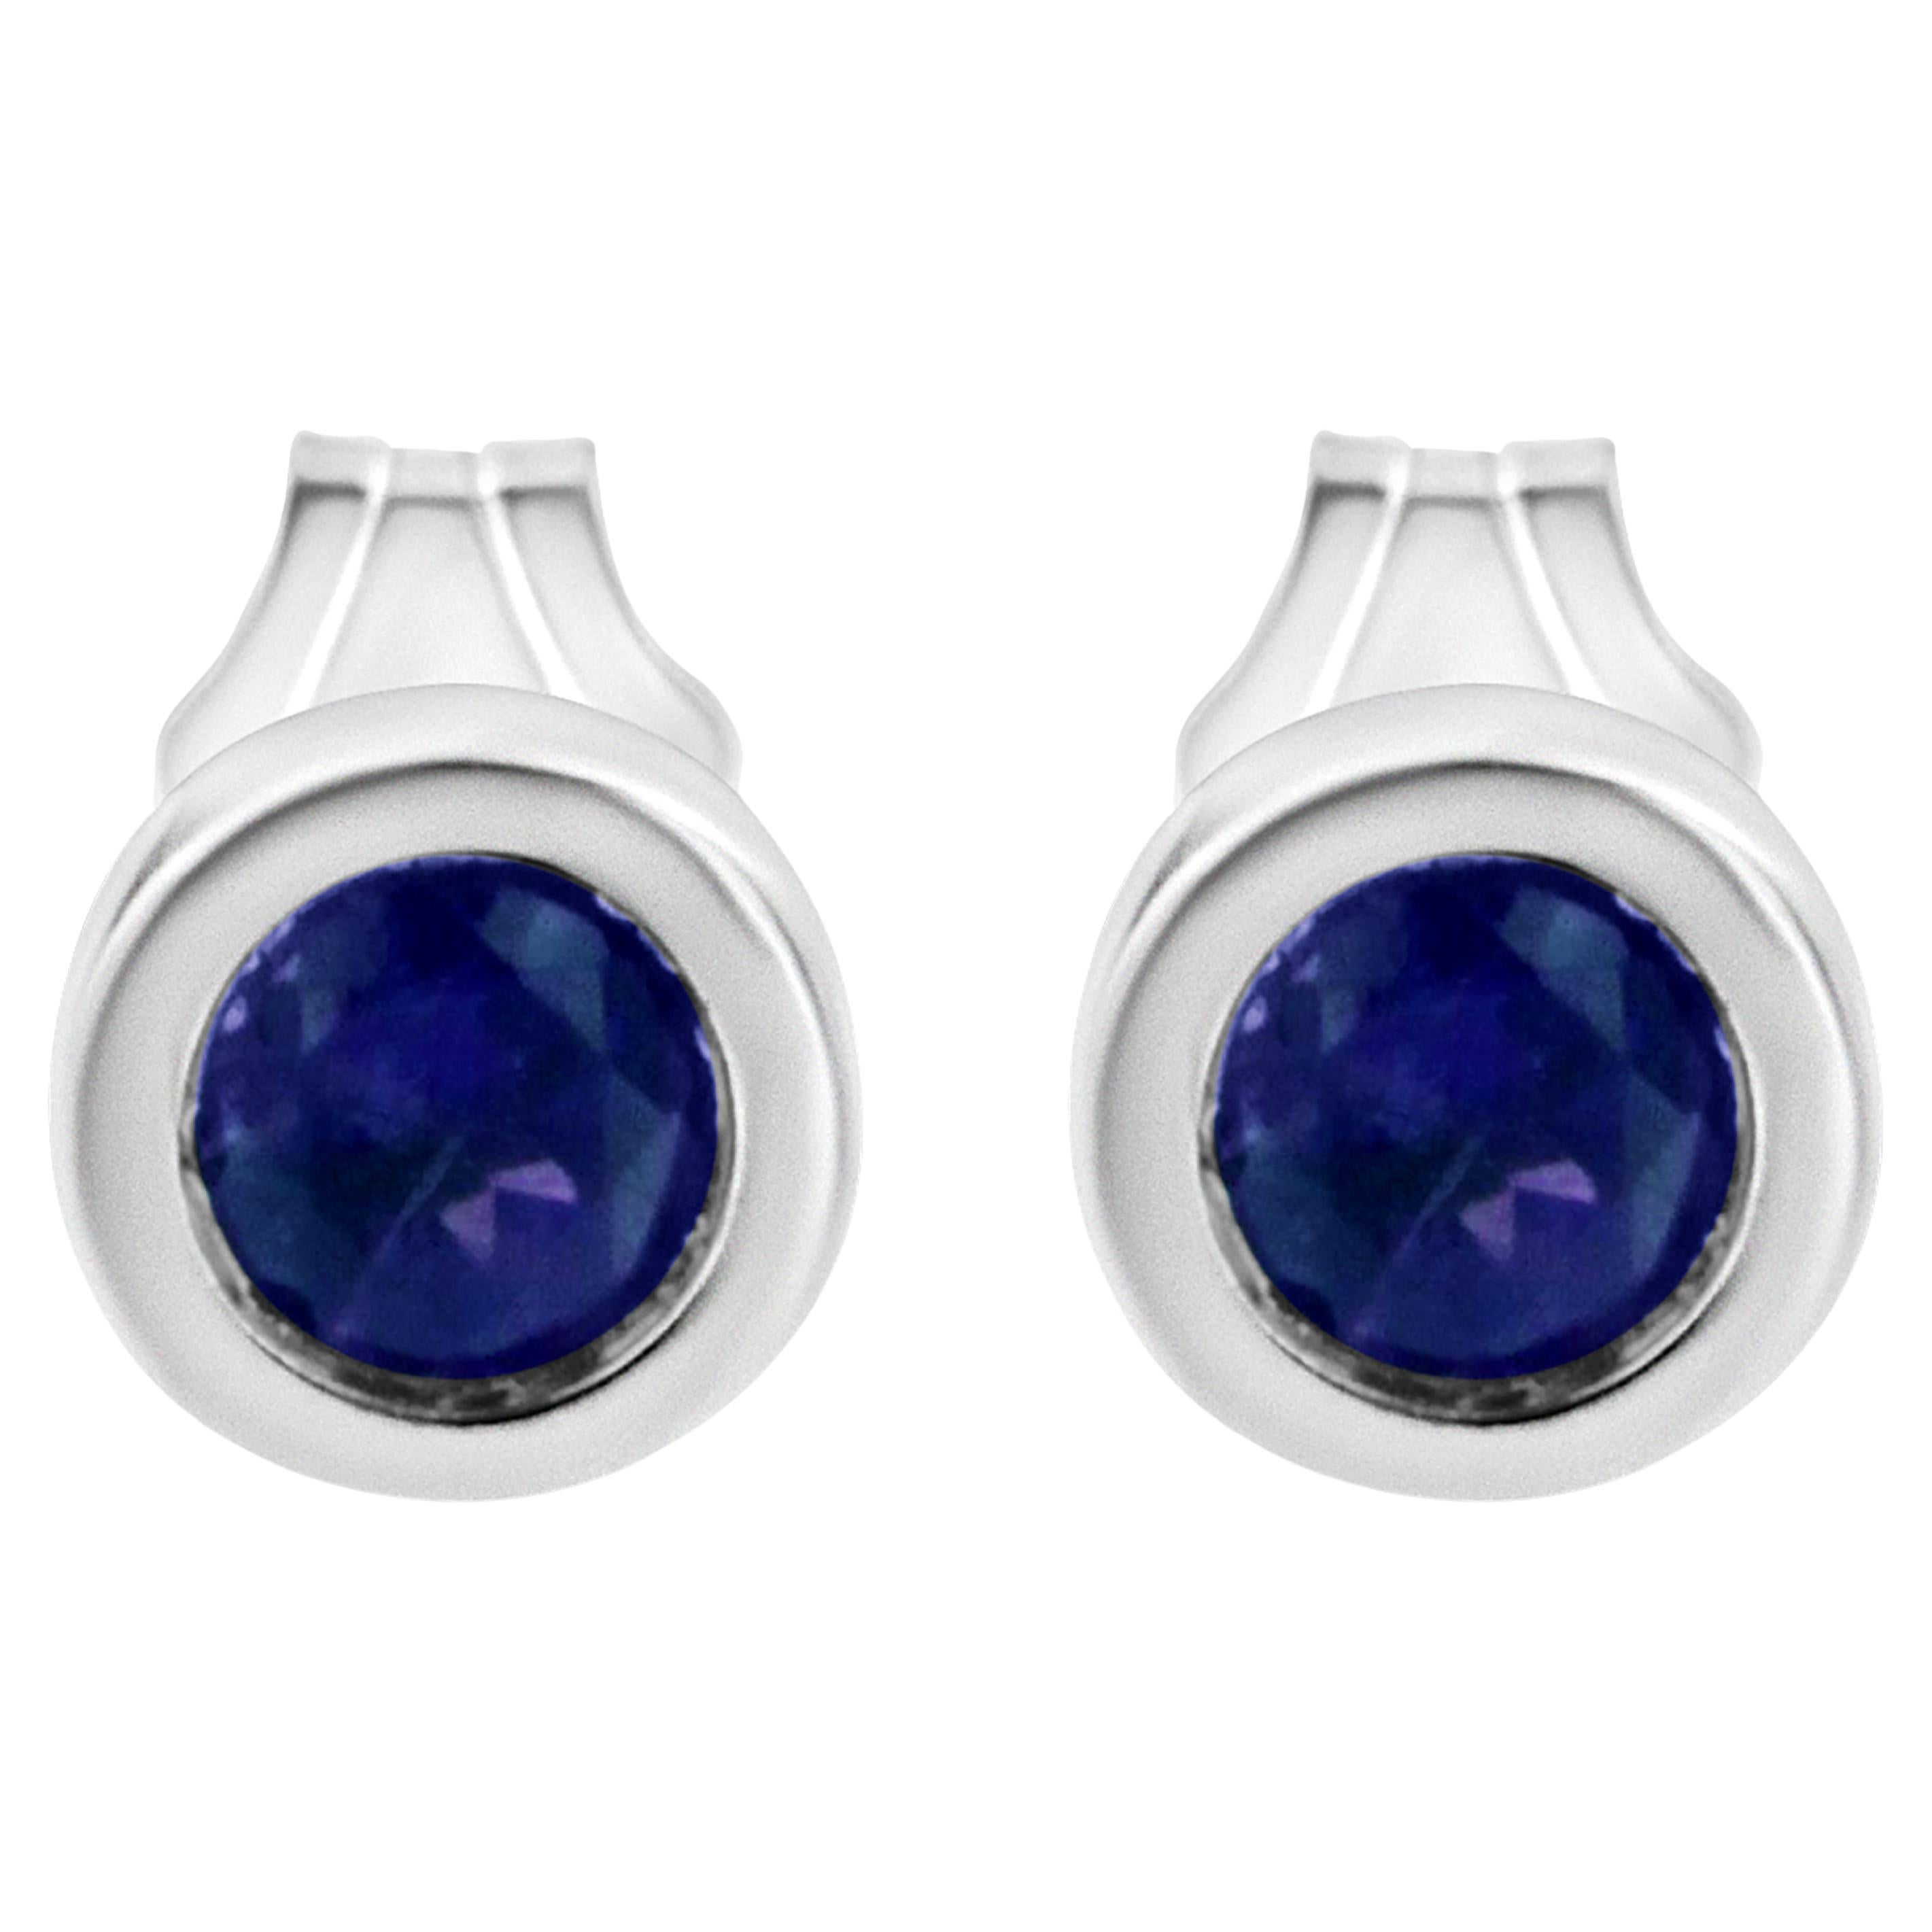 .925 Sterling Silver 3.5MM Treated Blue Sapphire Gemstone Solitaire Stud Earring